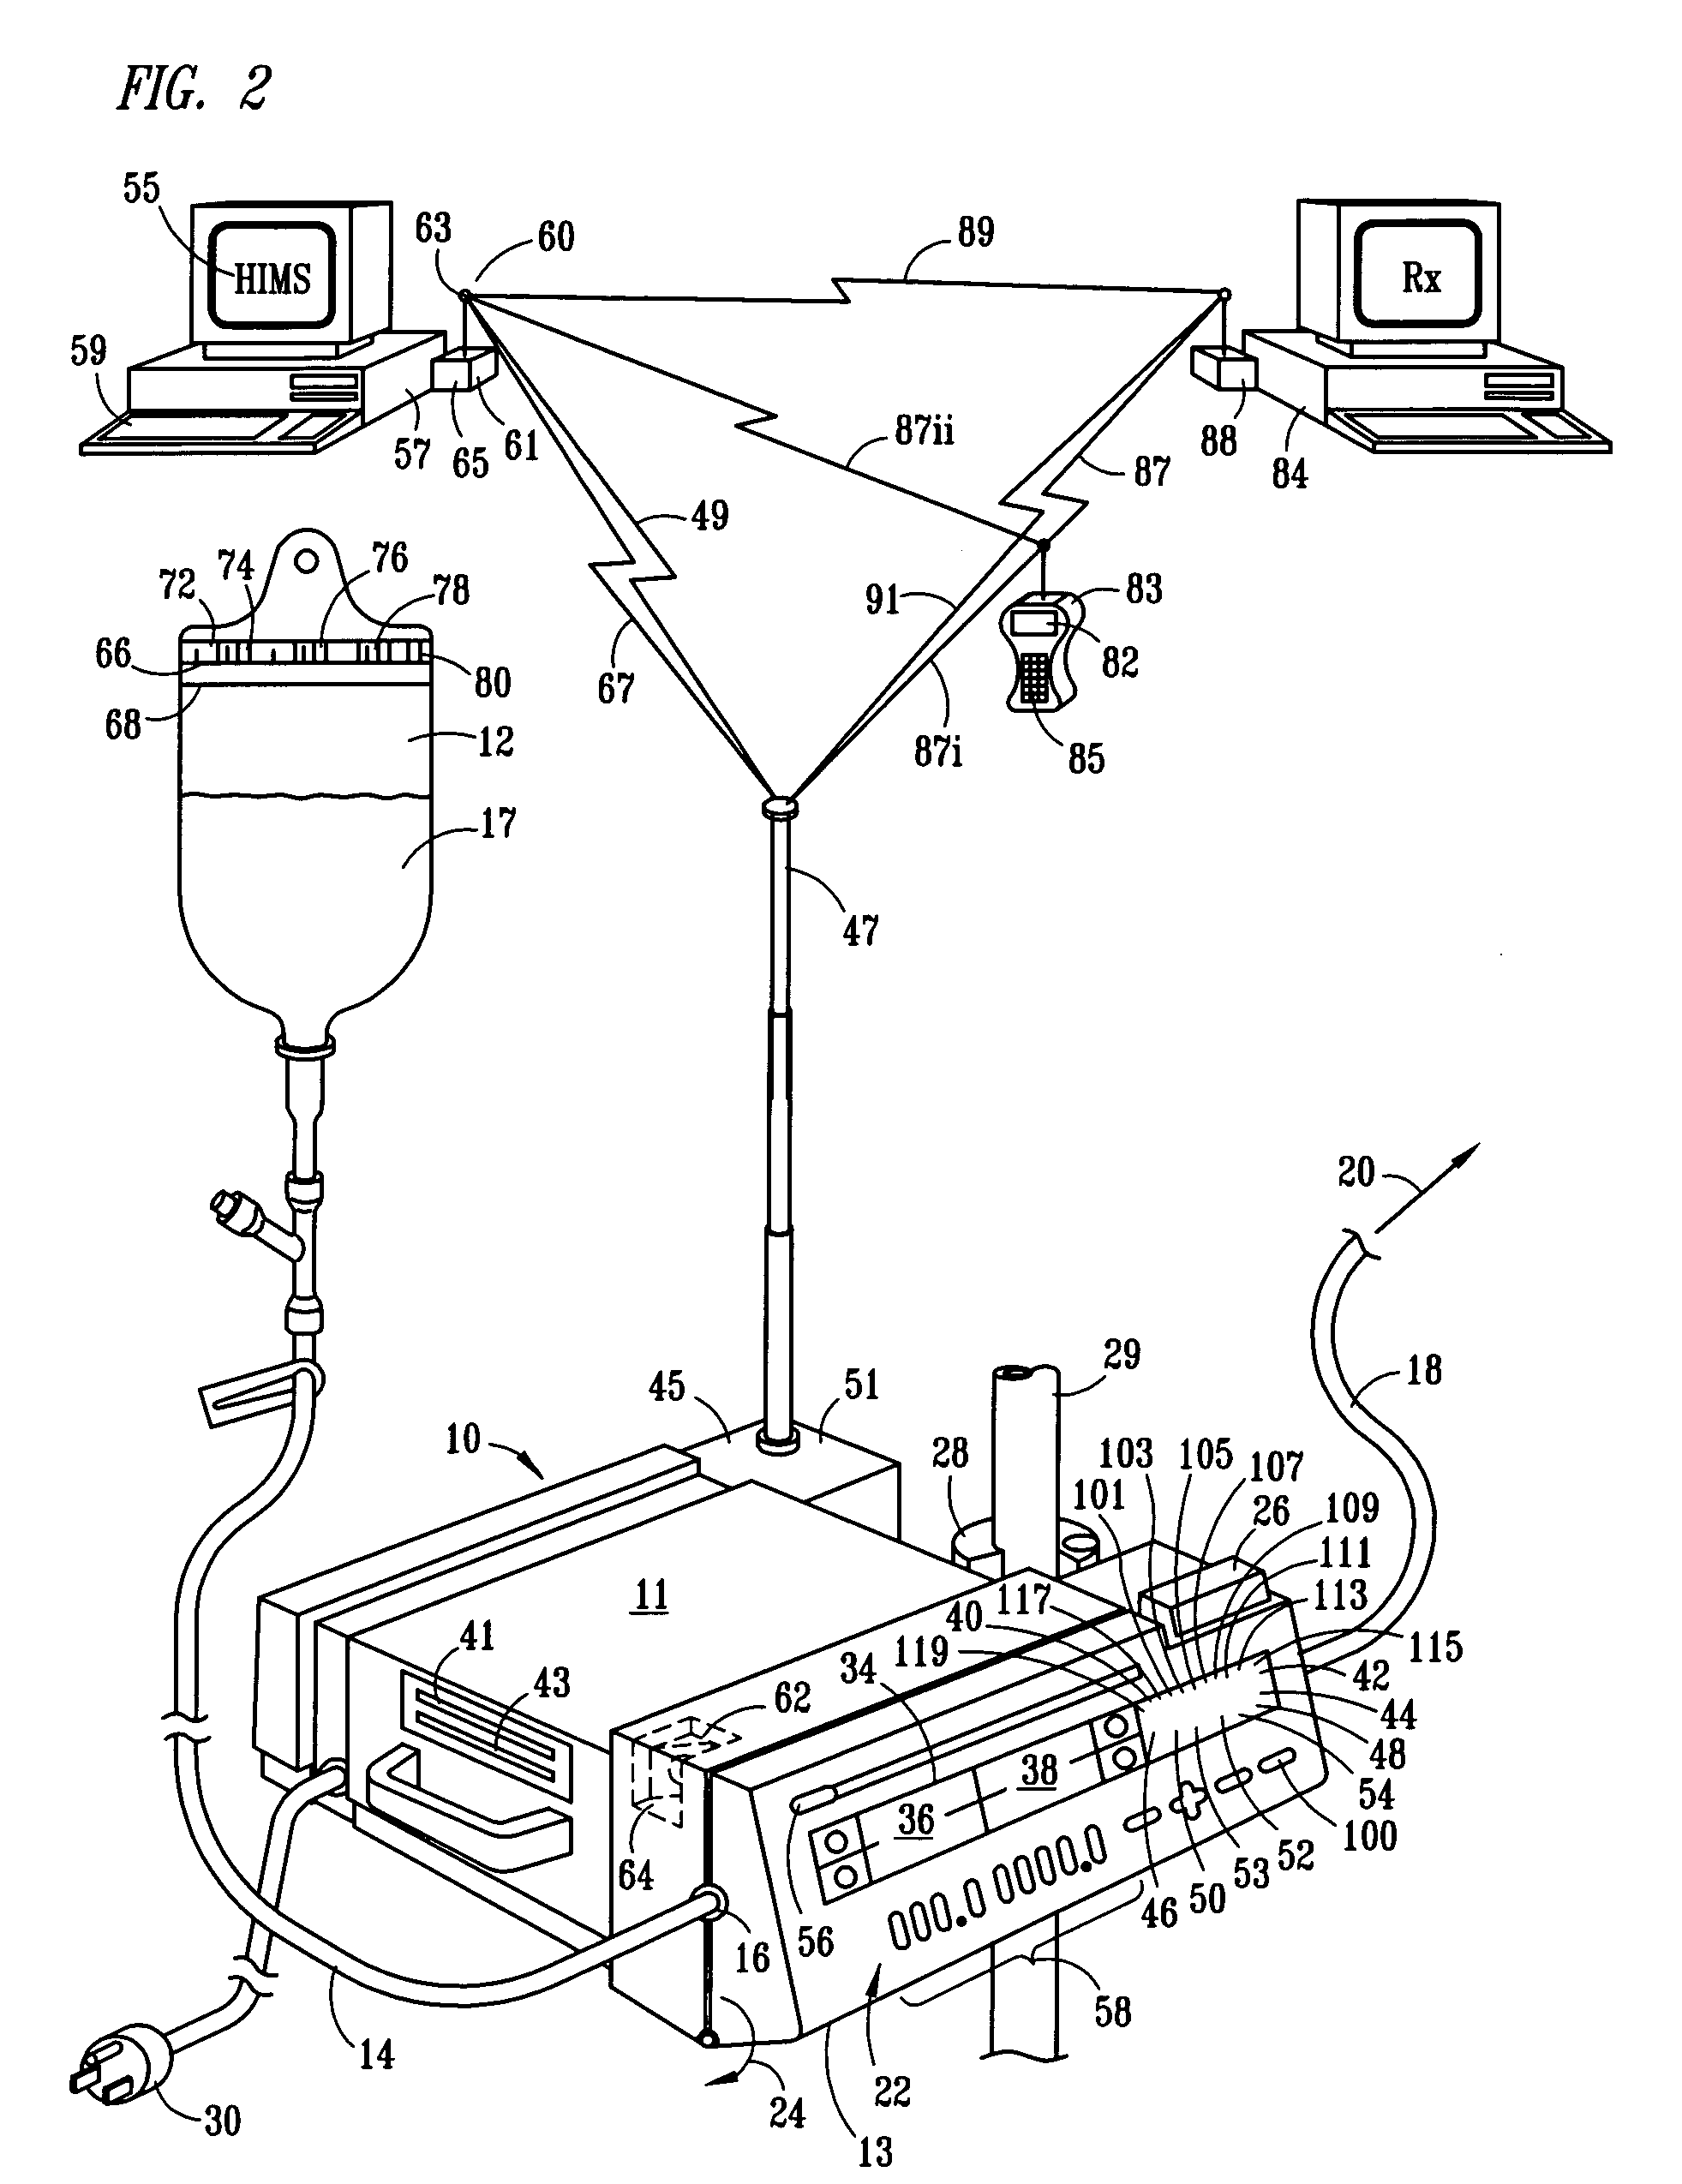 Patient medication IV delivery pump with wireless communication to a hospital information management system